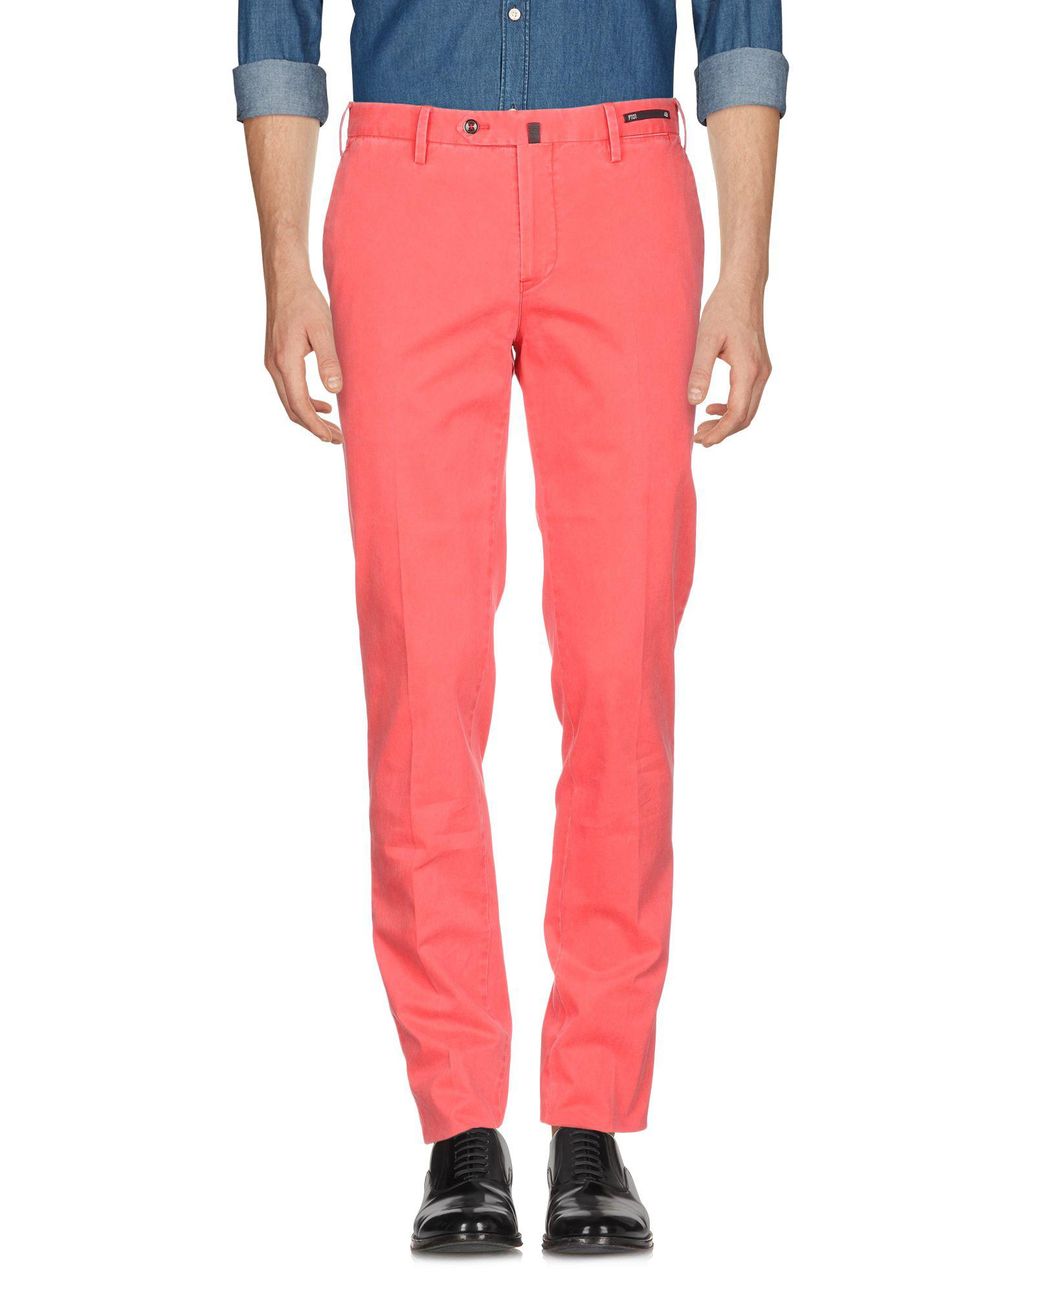 PT01 Cotton Casual Pants in Red for Men - Lyst